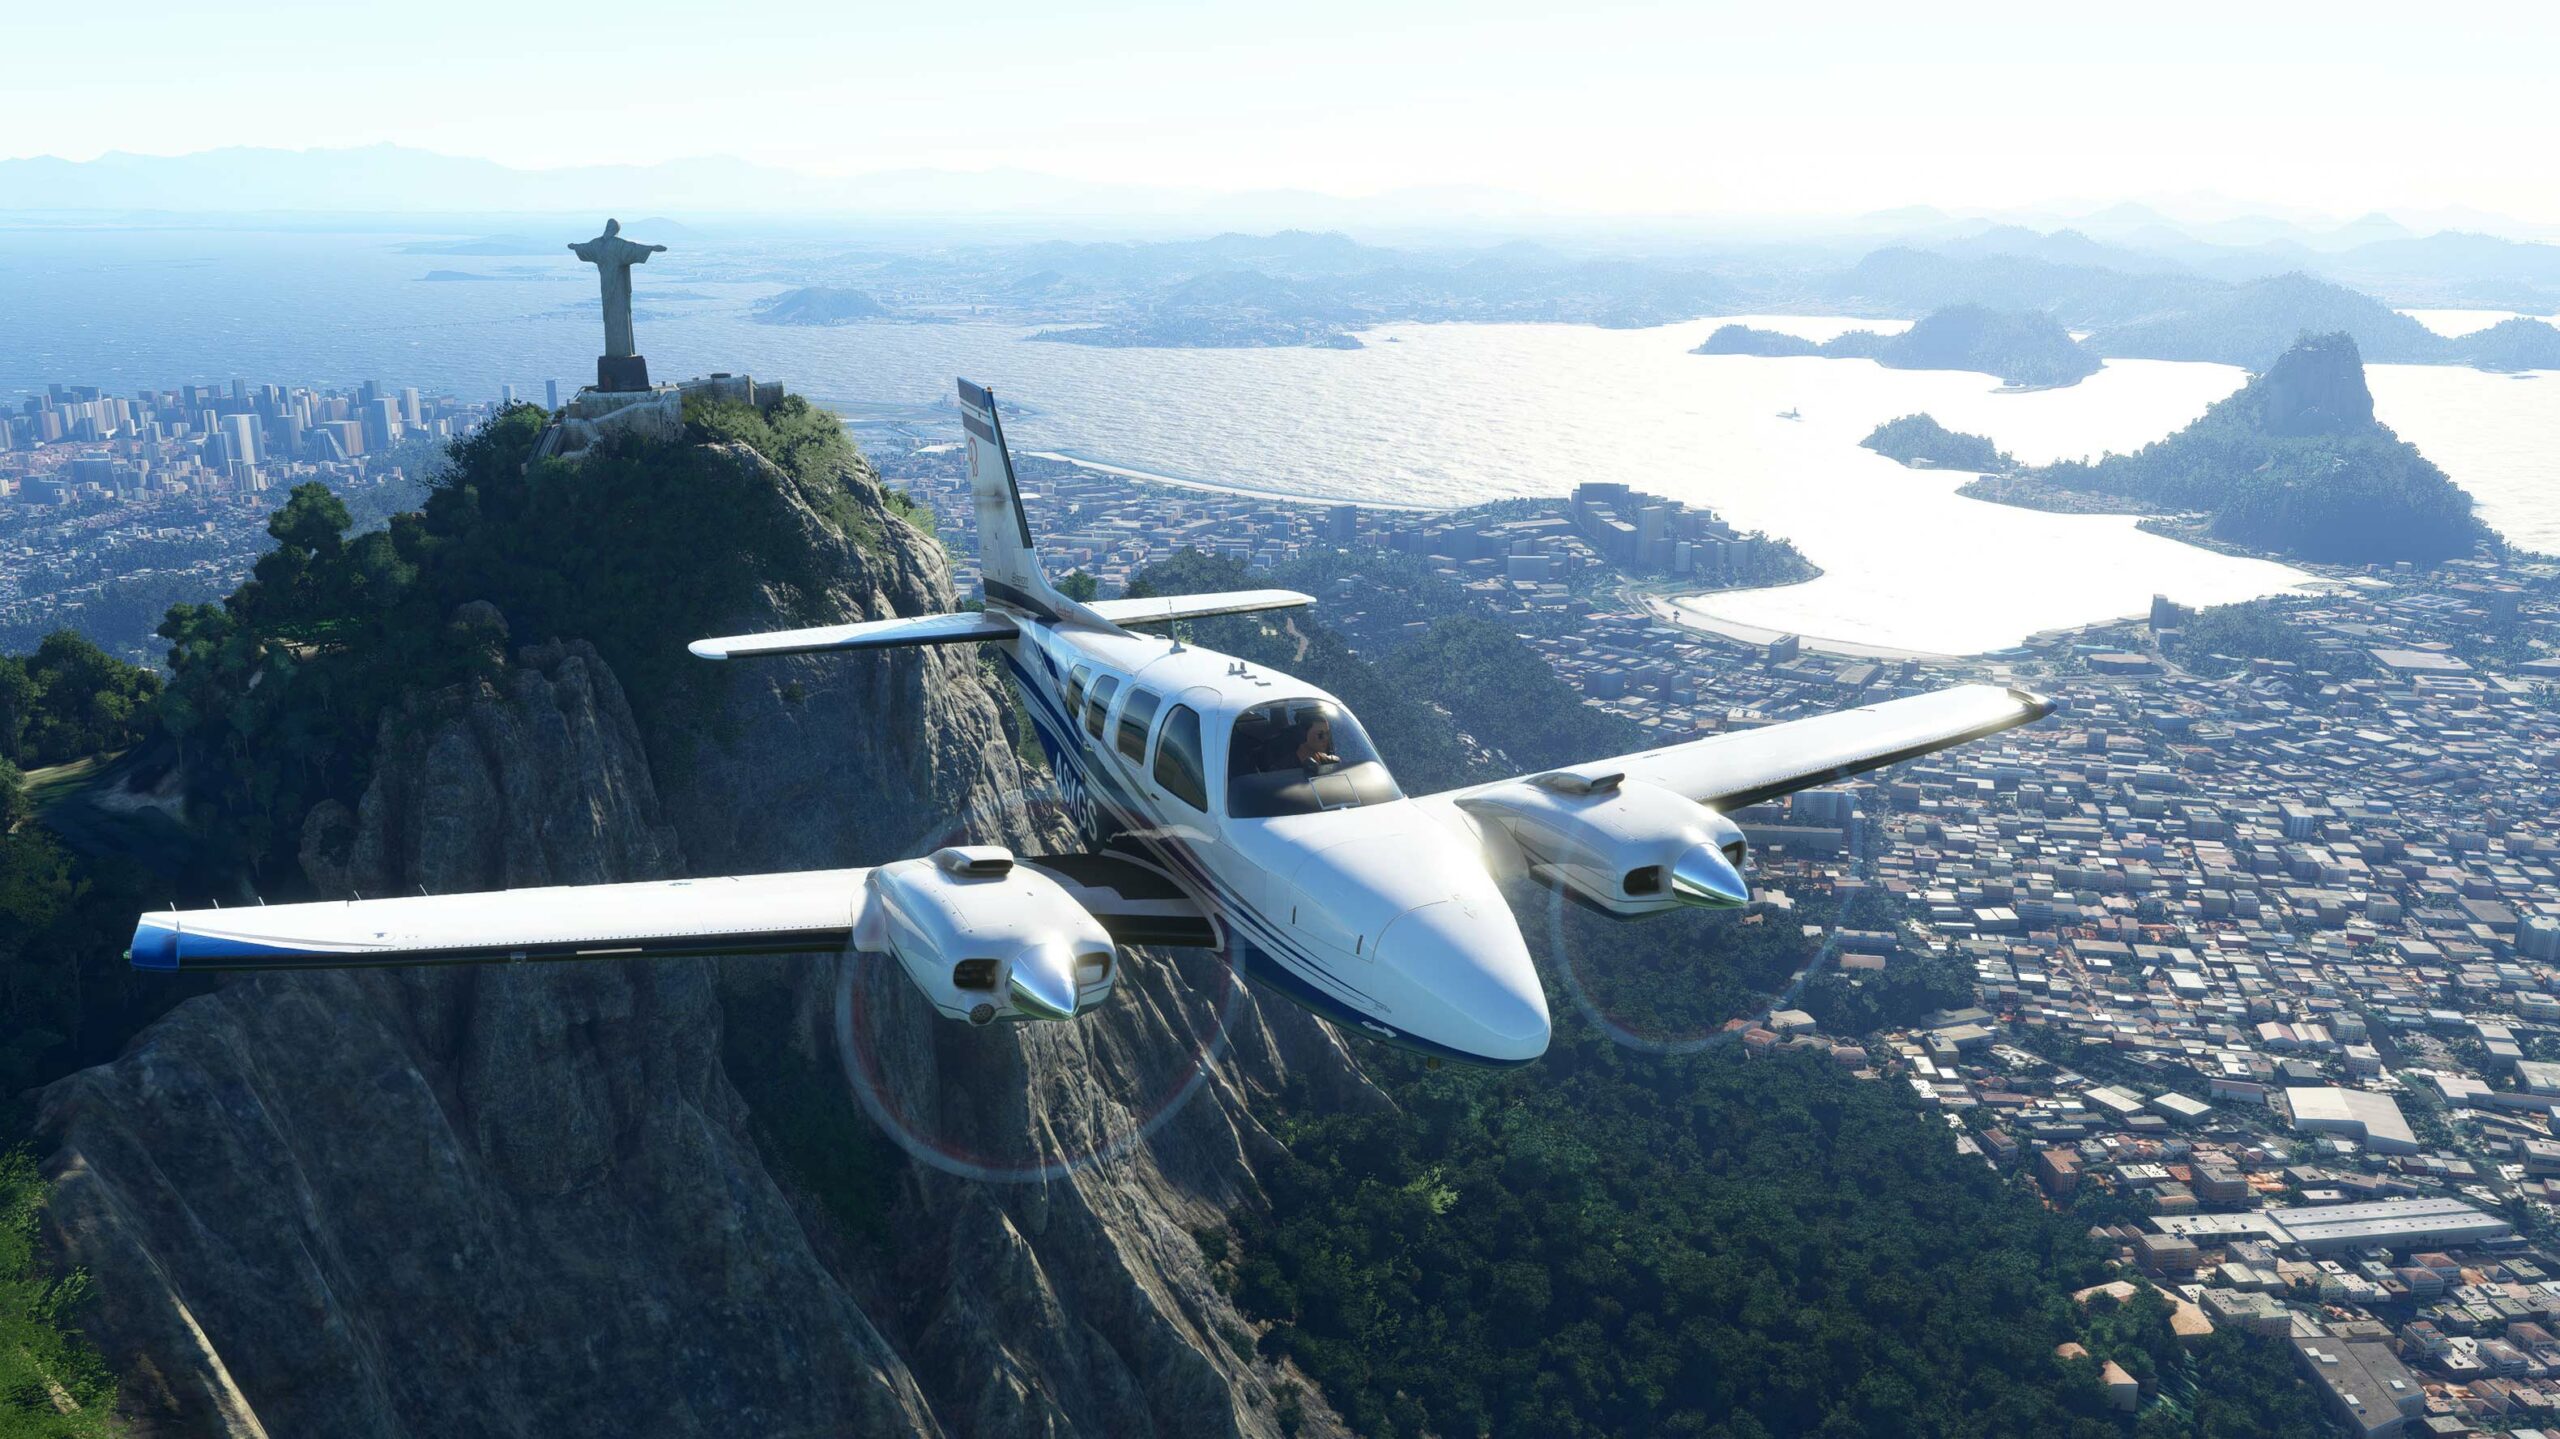 Microsoft Flight Simulator's 40th anniversary update adds helicopters and  gliders